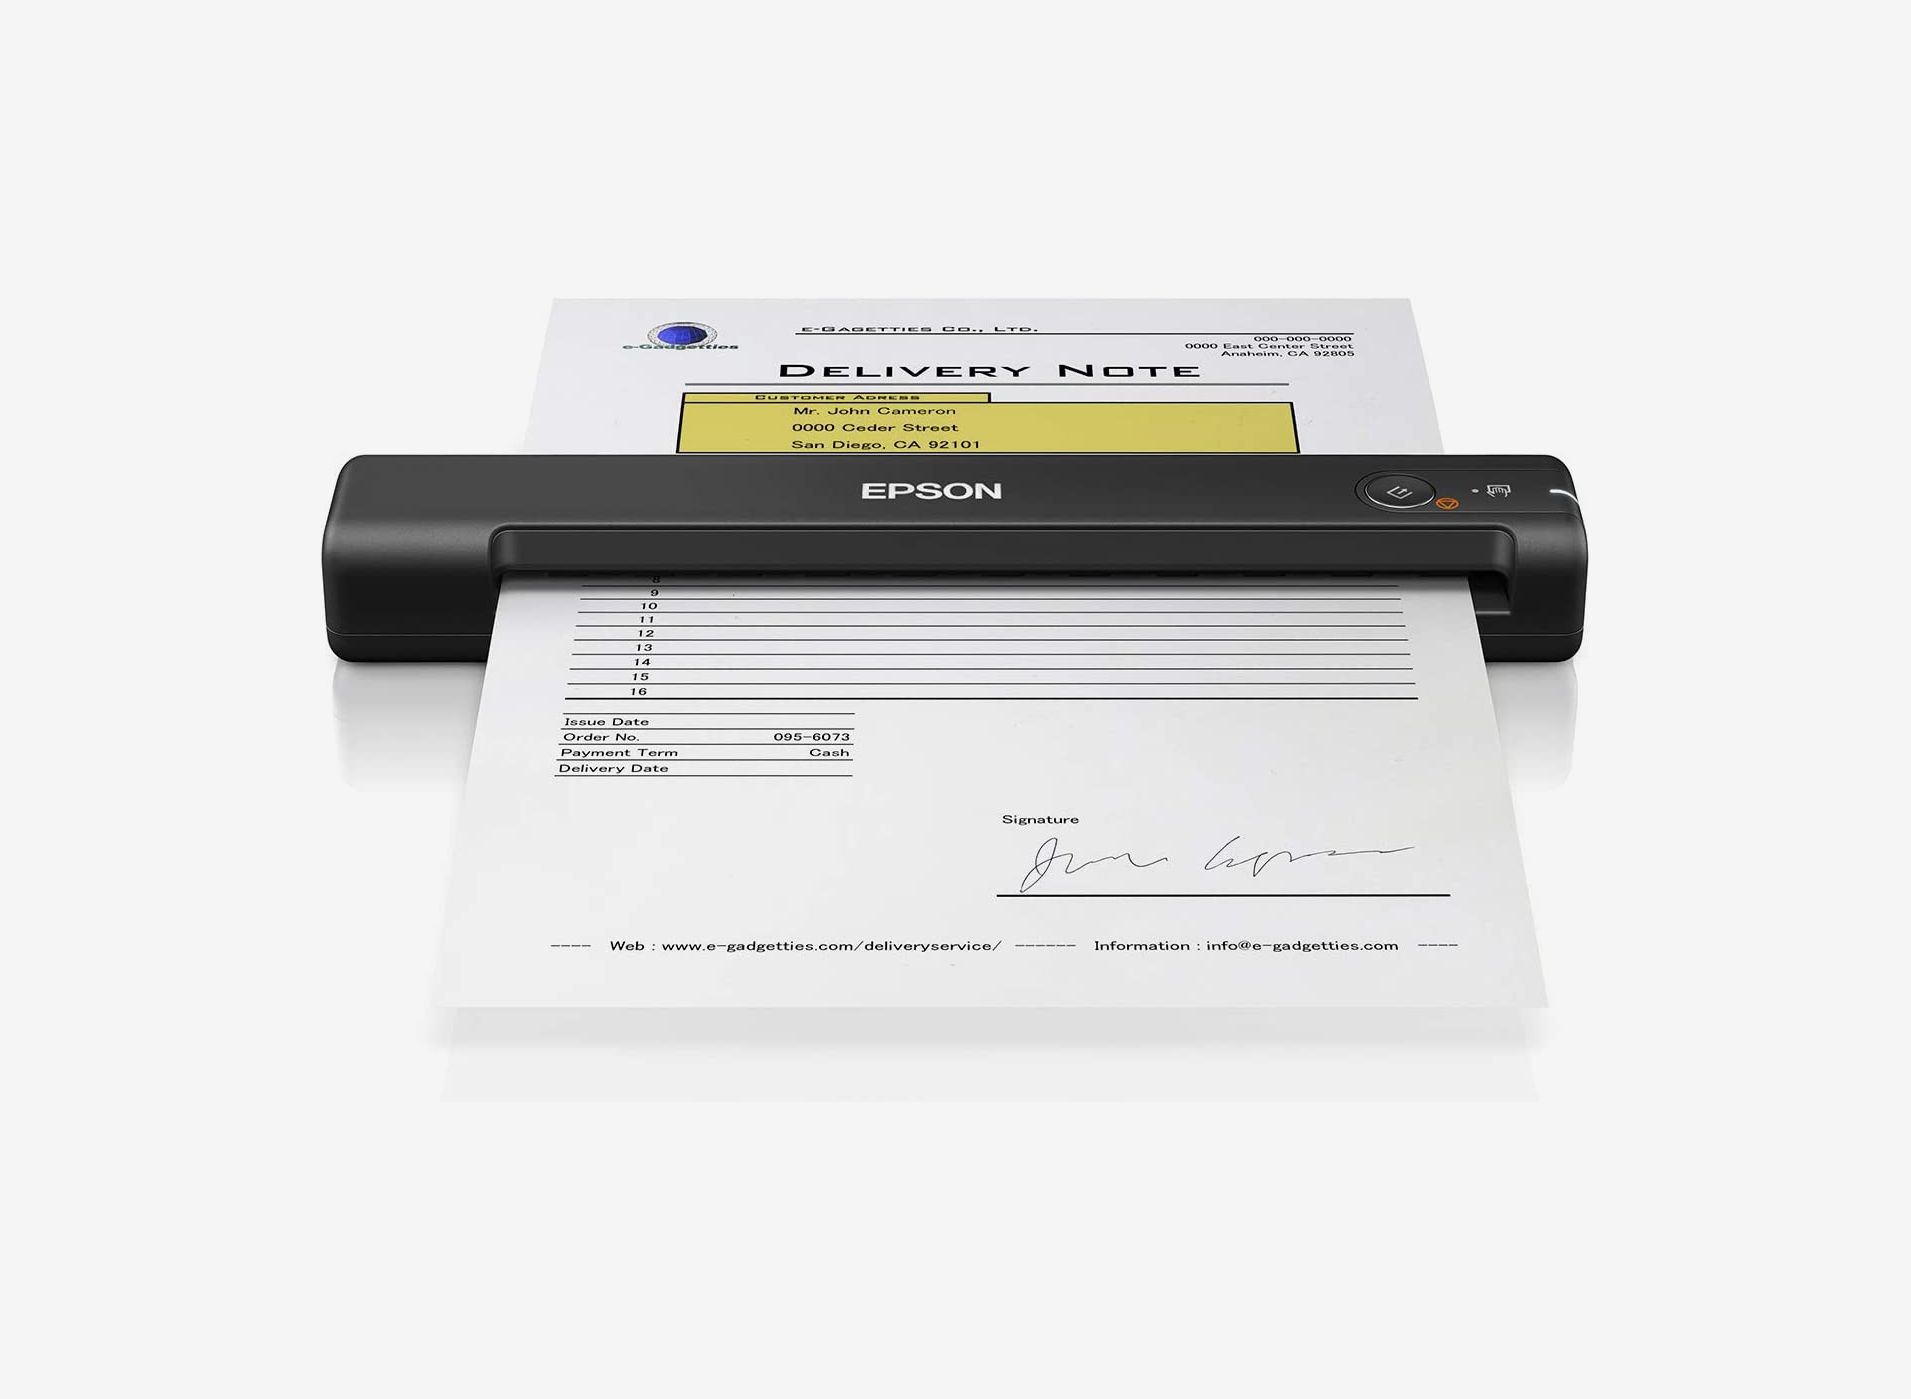 From the Wirecutter: The best portable document scanner